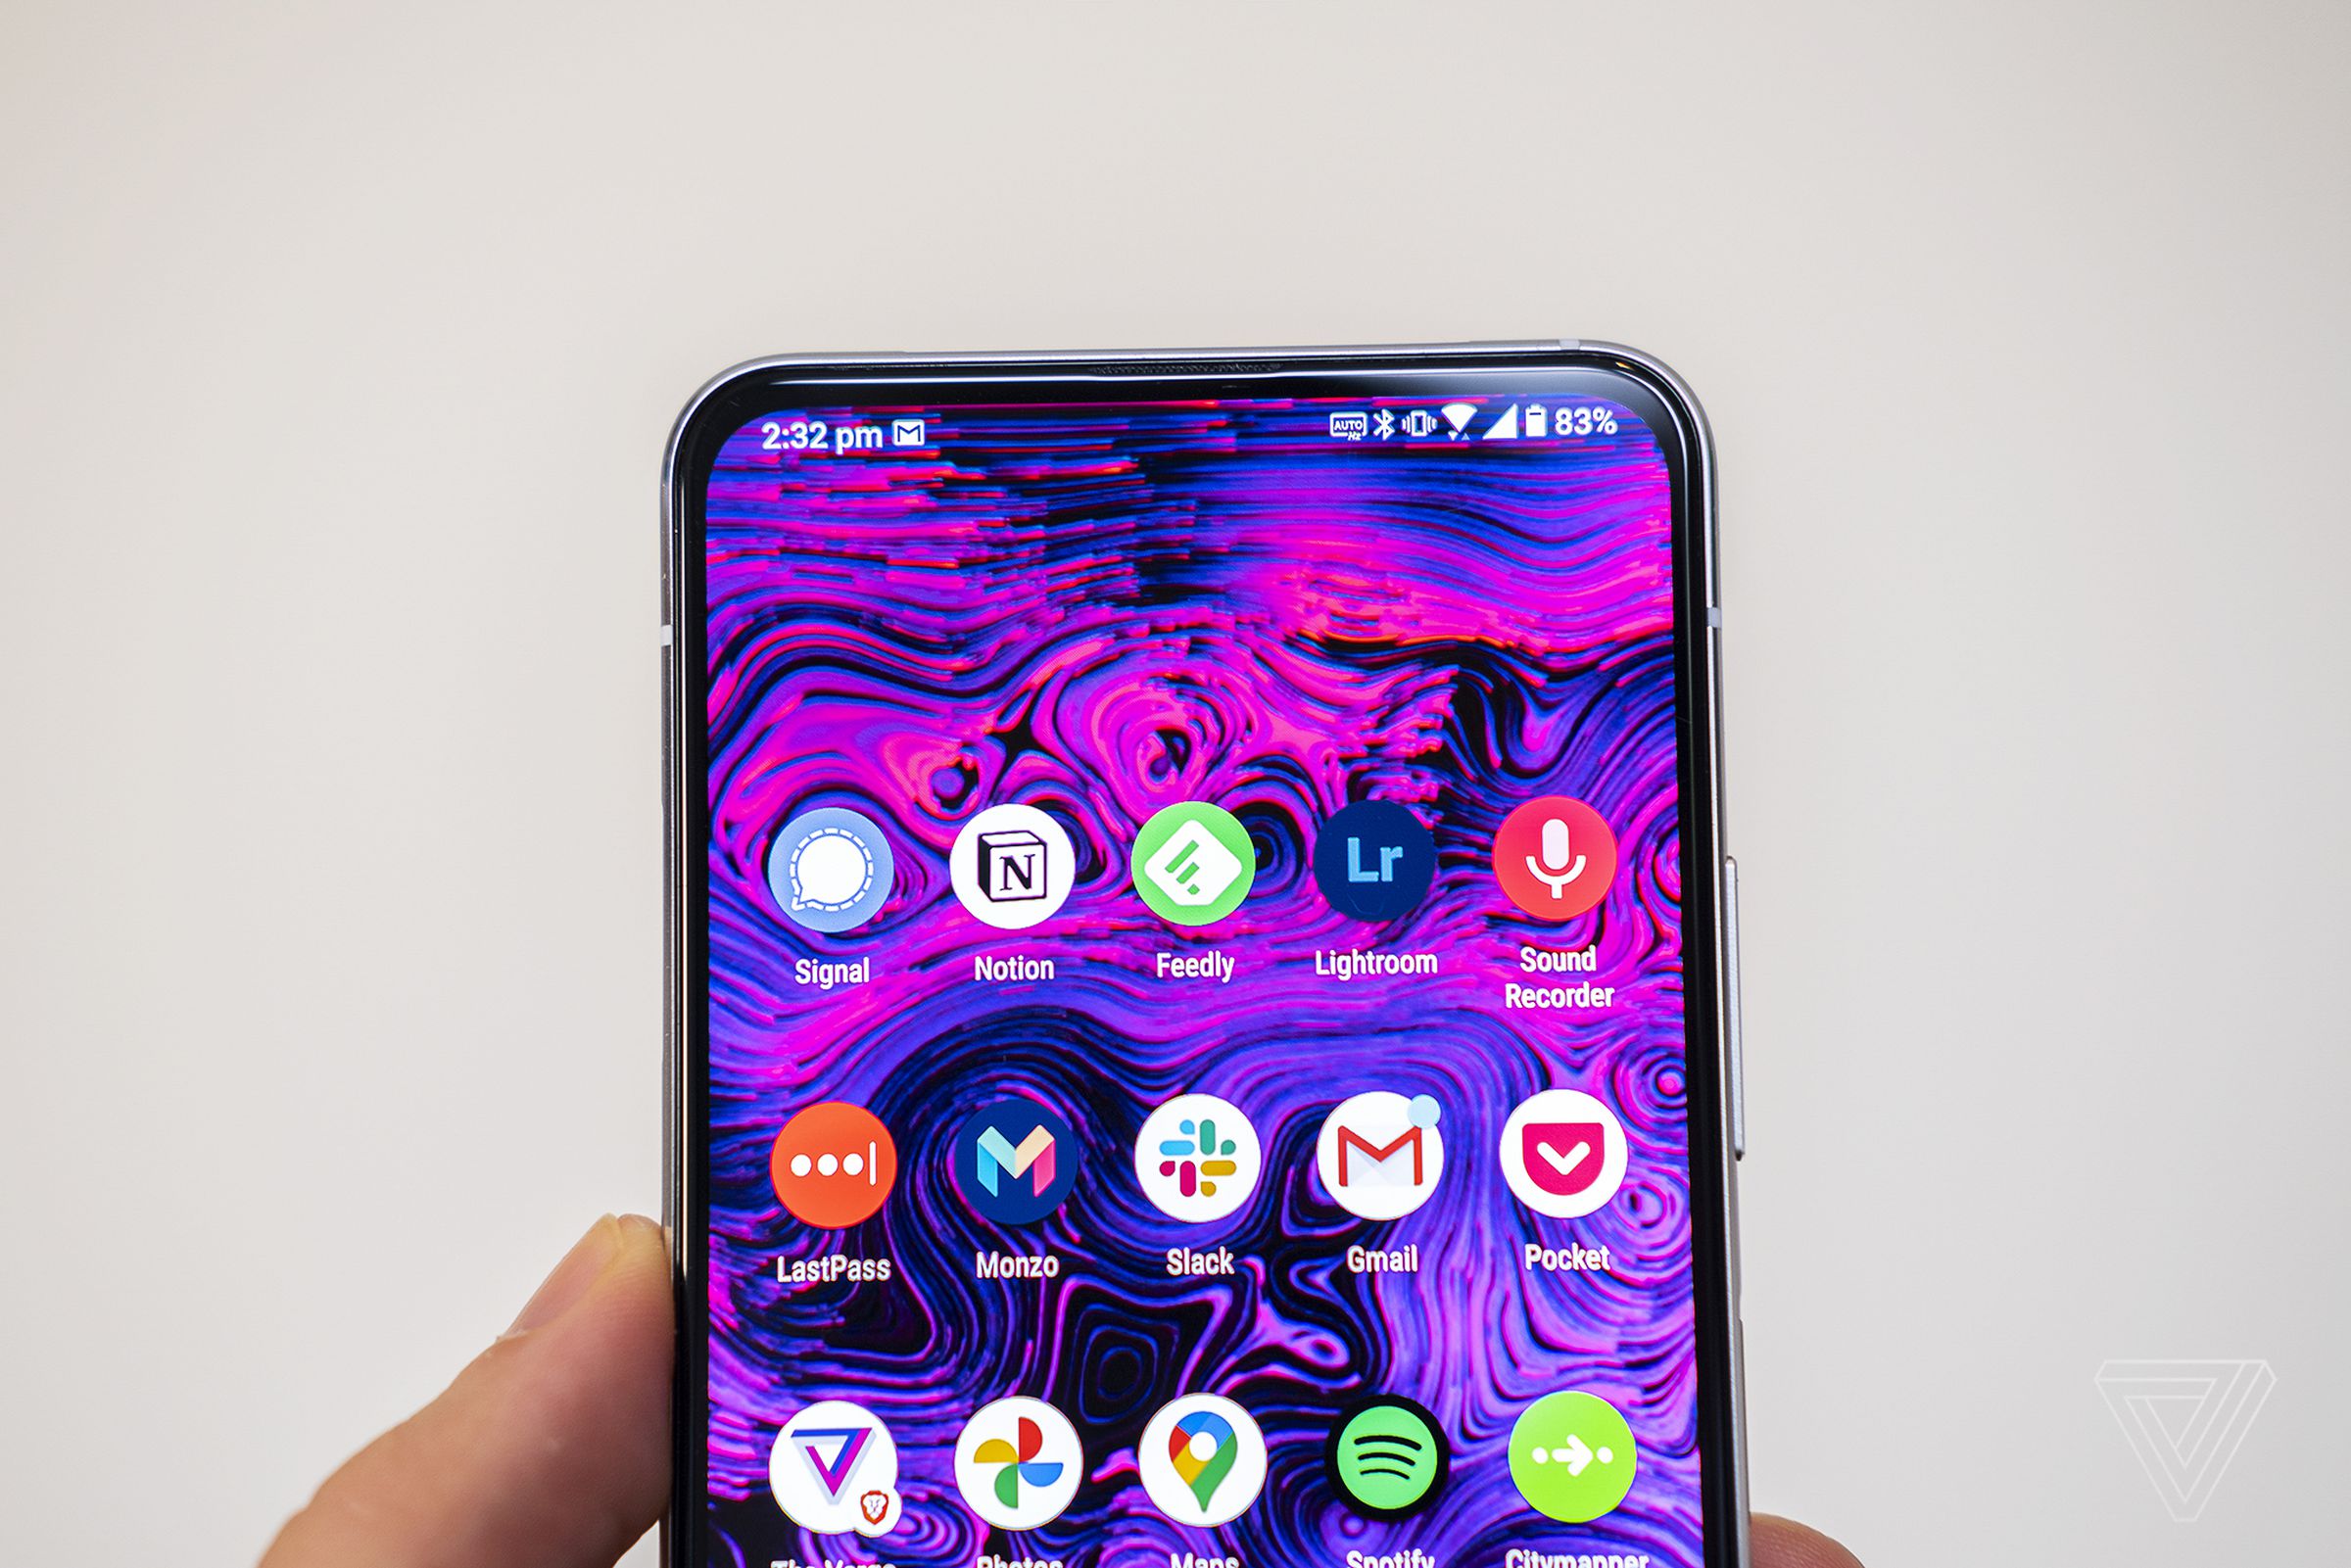 Flipping cameras means no display notch or hole-punch cutout for a selfie camera.